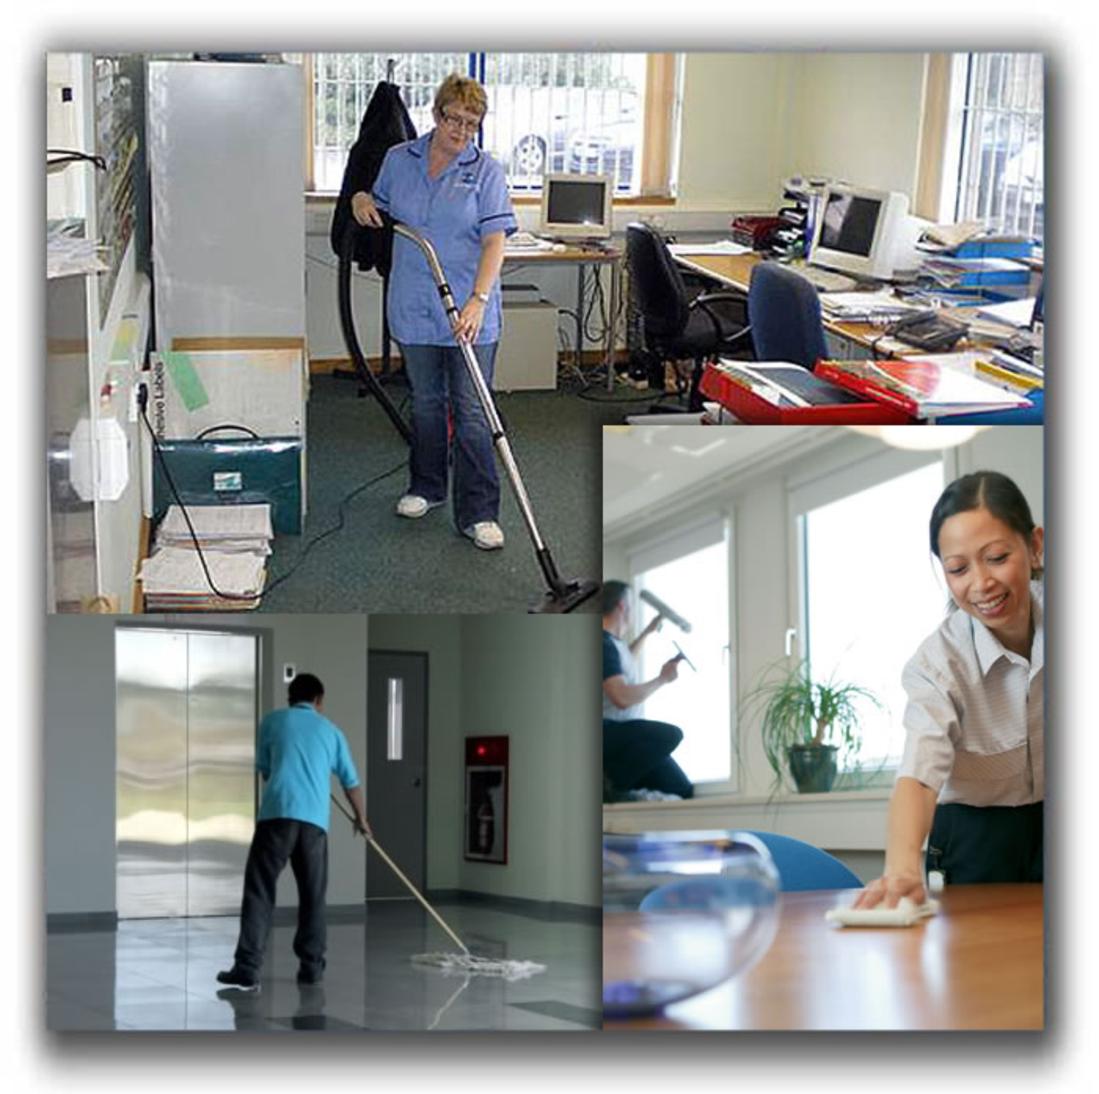 COMMERCIAL CLEANING JANITORIAL SERVICES MERCEDES TX MCALLEN